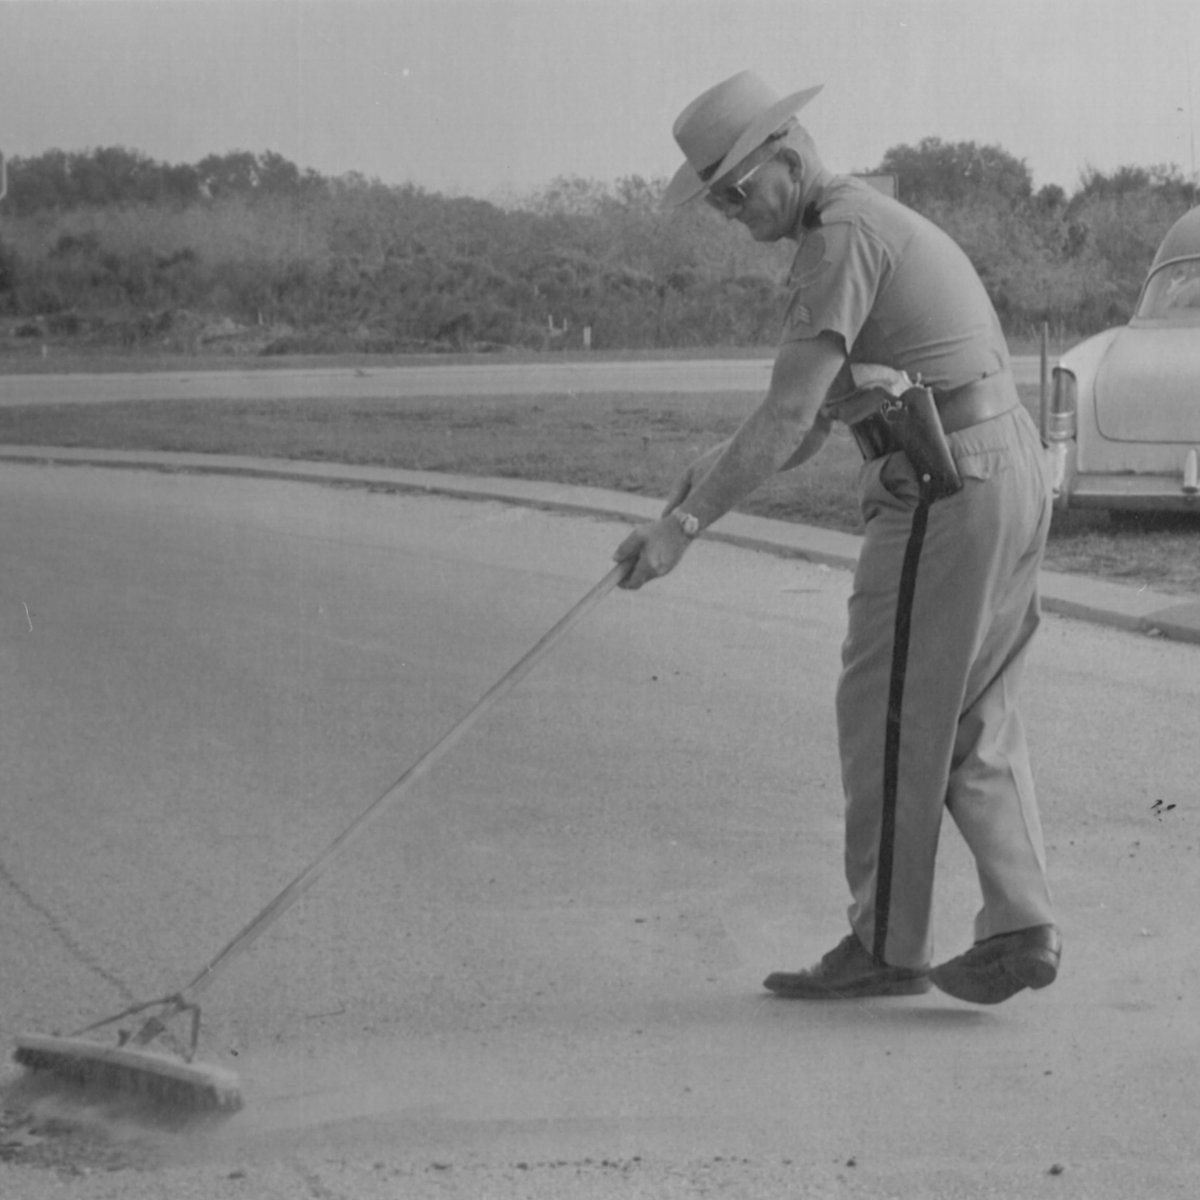 Sgt. G.W. 'Whitney' Knutsen clears the roadway from debris following a crash in Manatee County 1963. #FHP #StateTrooper #ThrowbackThursday #LawEnforcement #ManateeCounty #FloridaHistory #PoliceWork #VintagePolice #PoliceOfficer #1960s